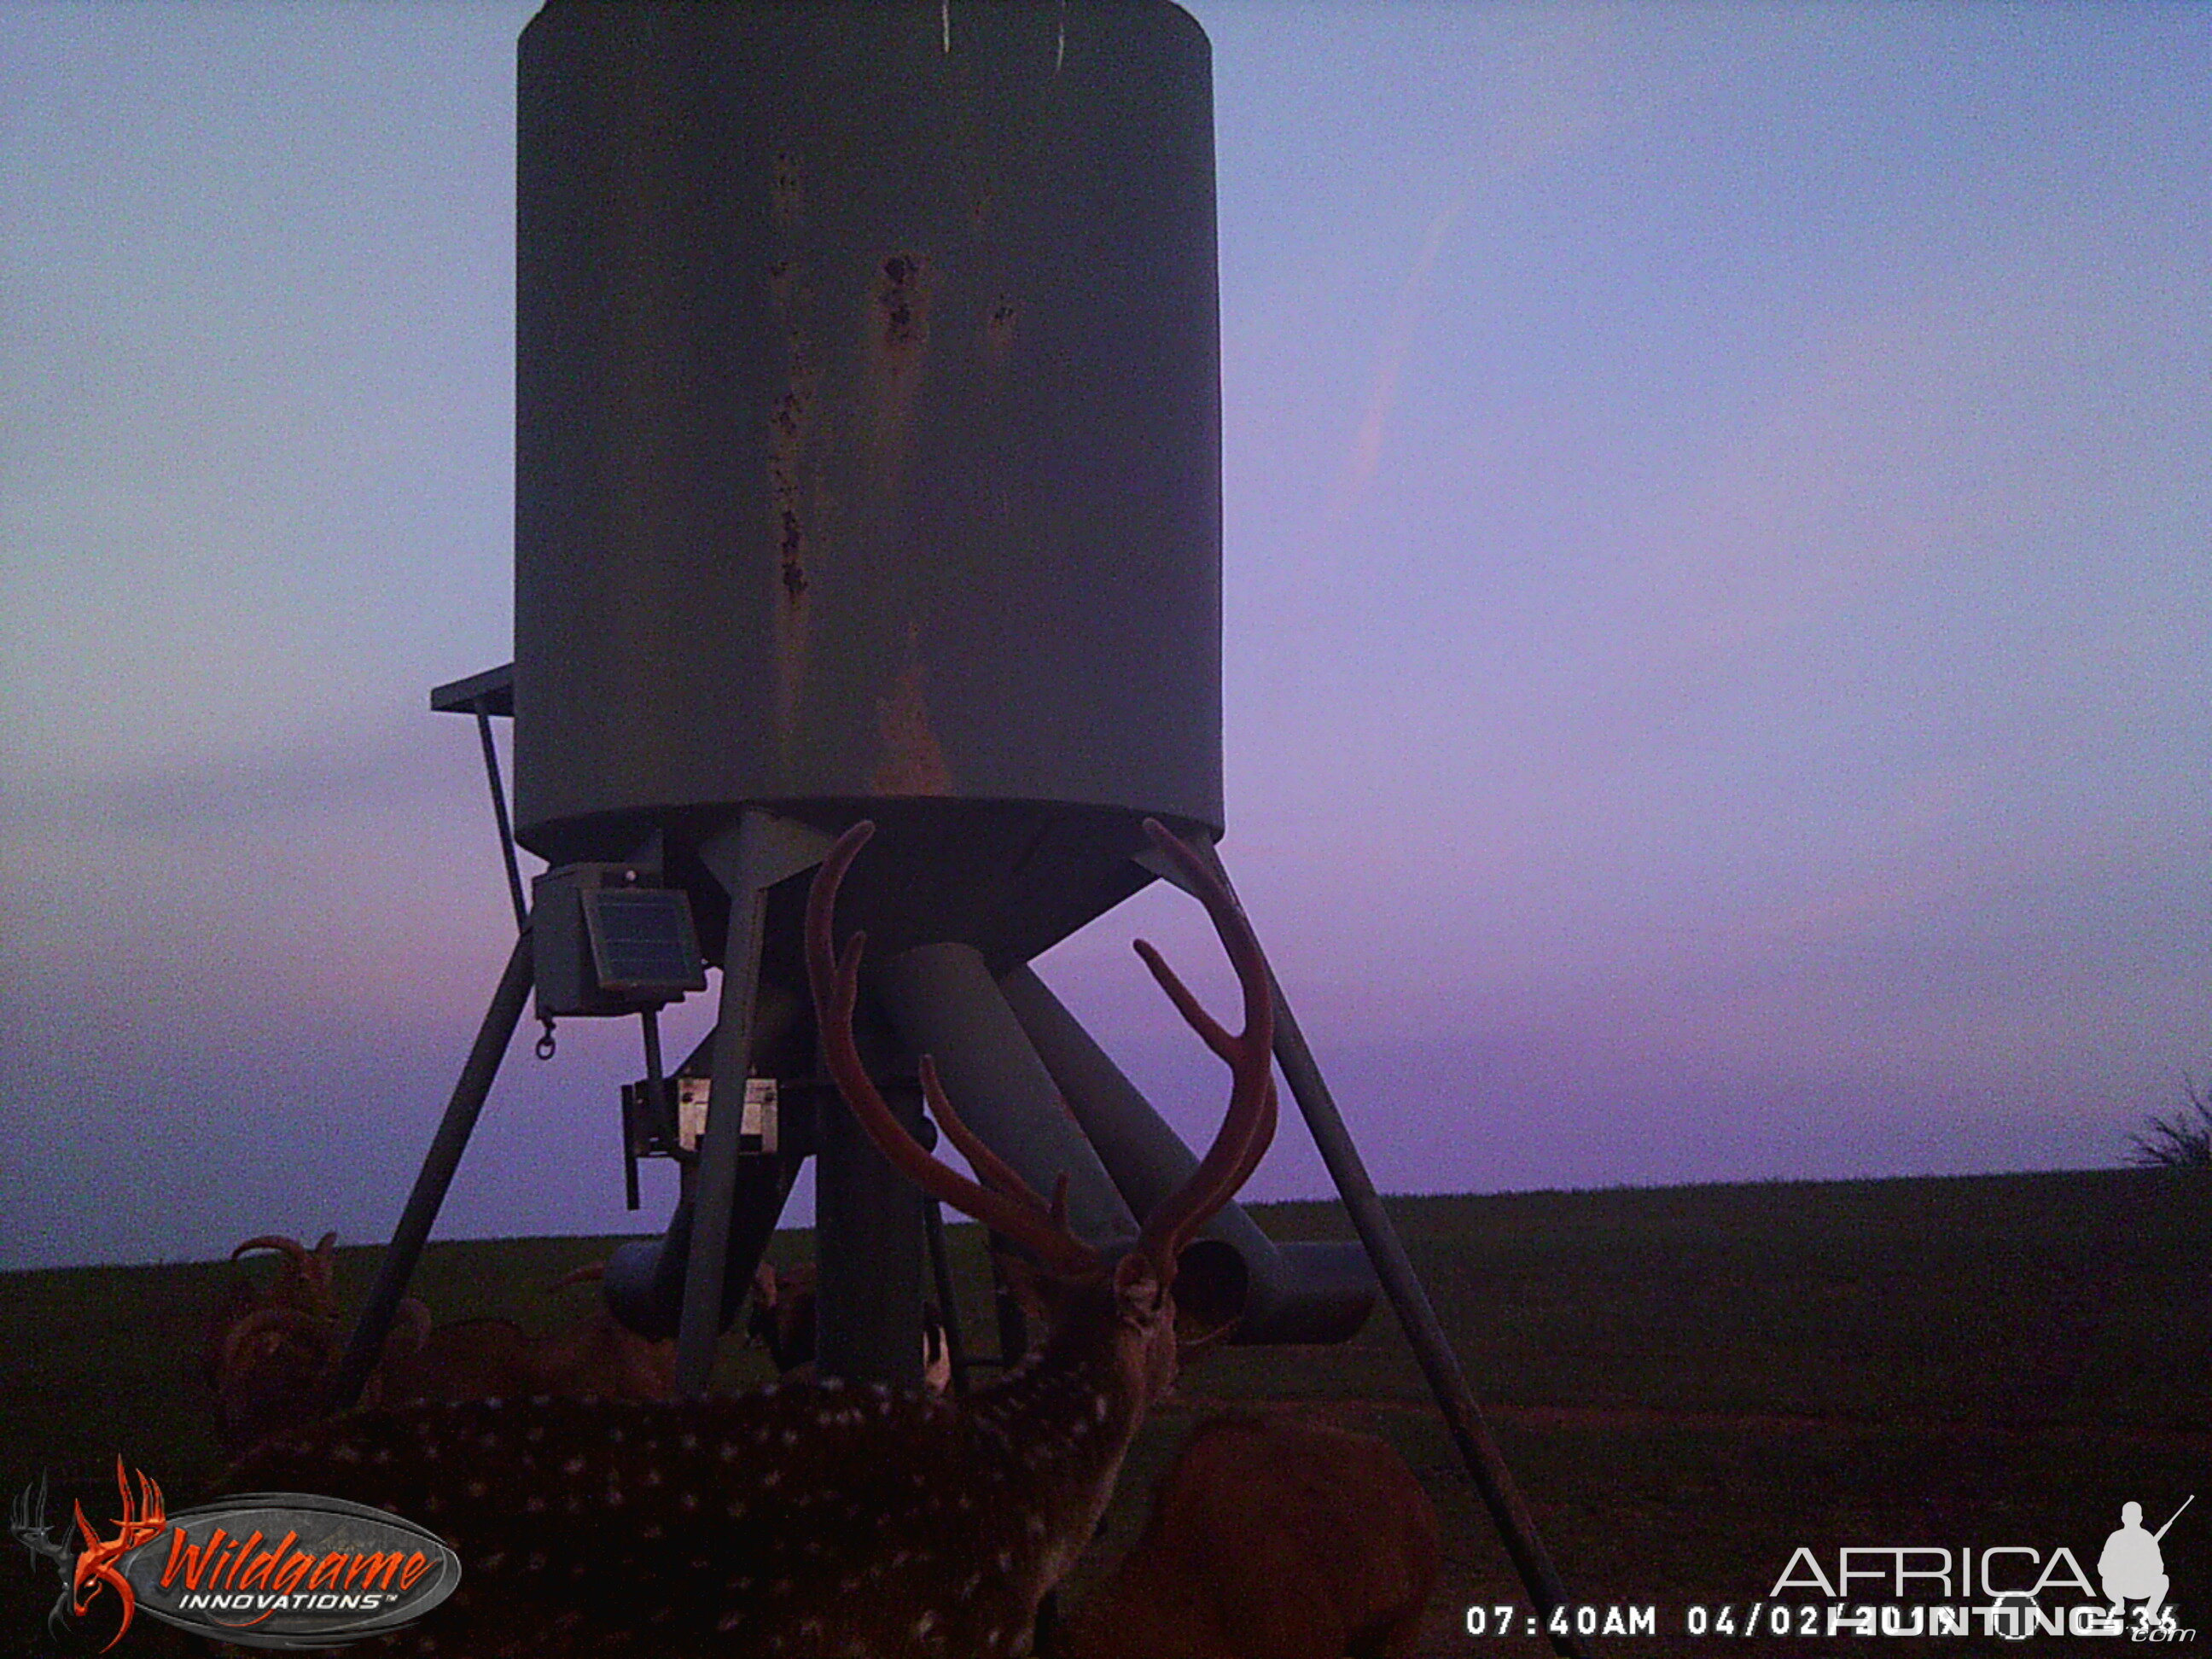 Texas USA Trail Cam Pictures Axis Deer